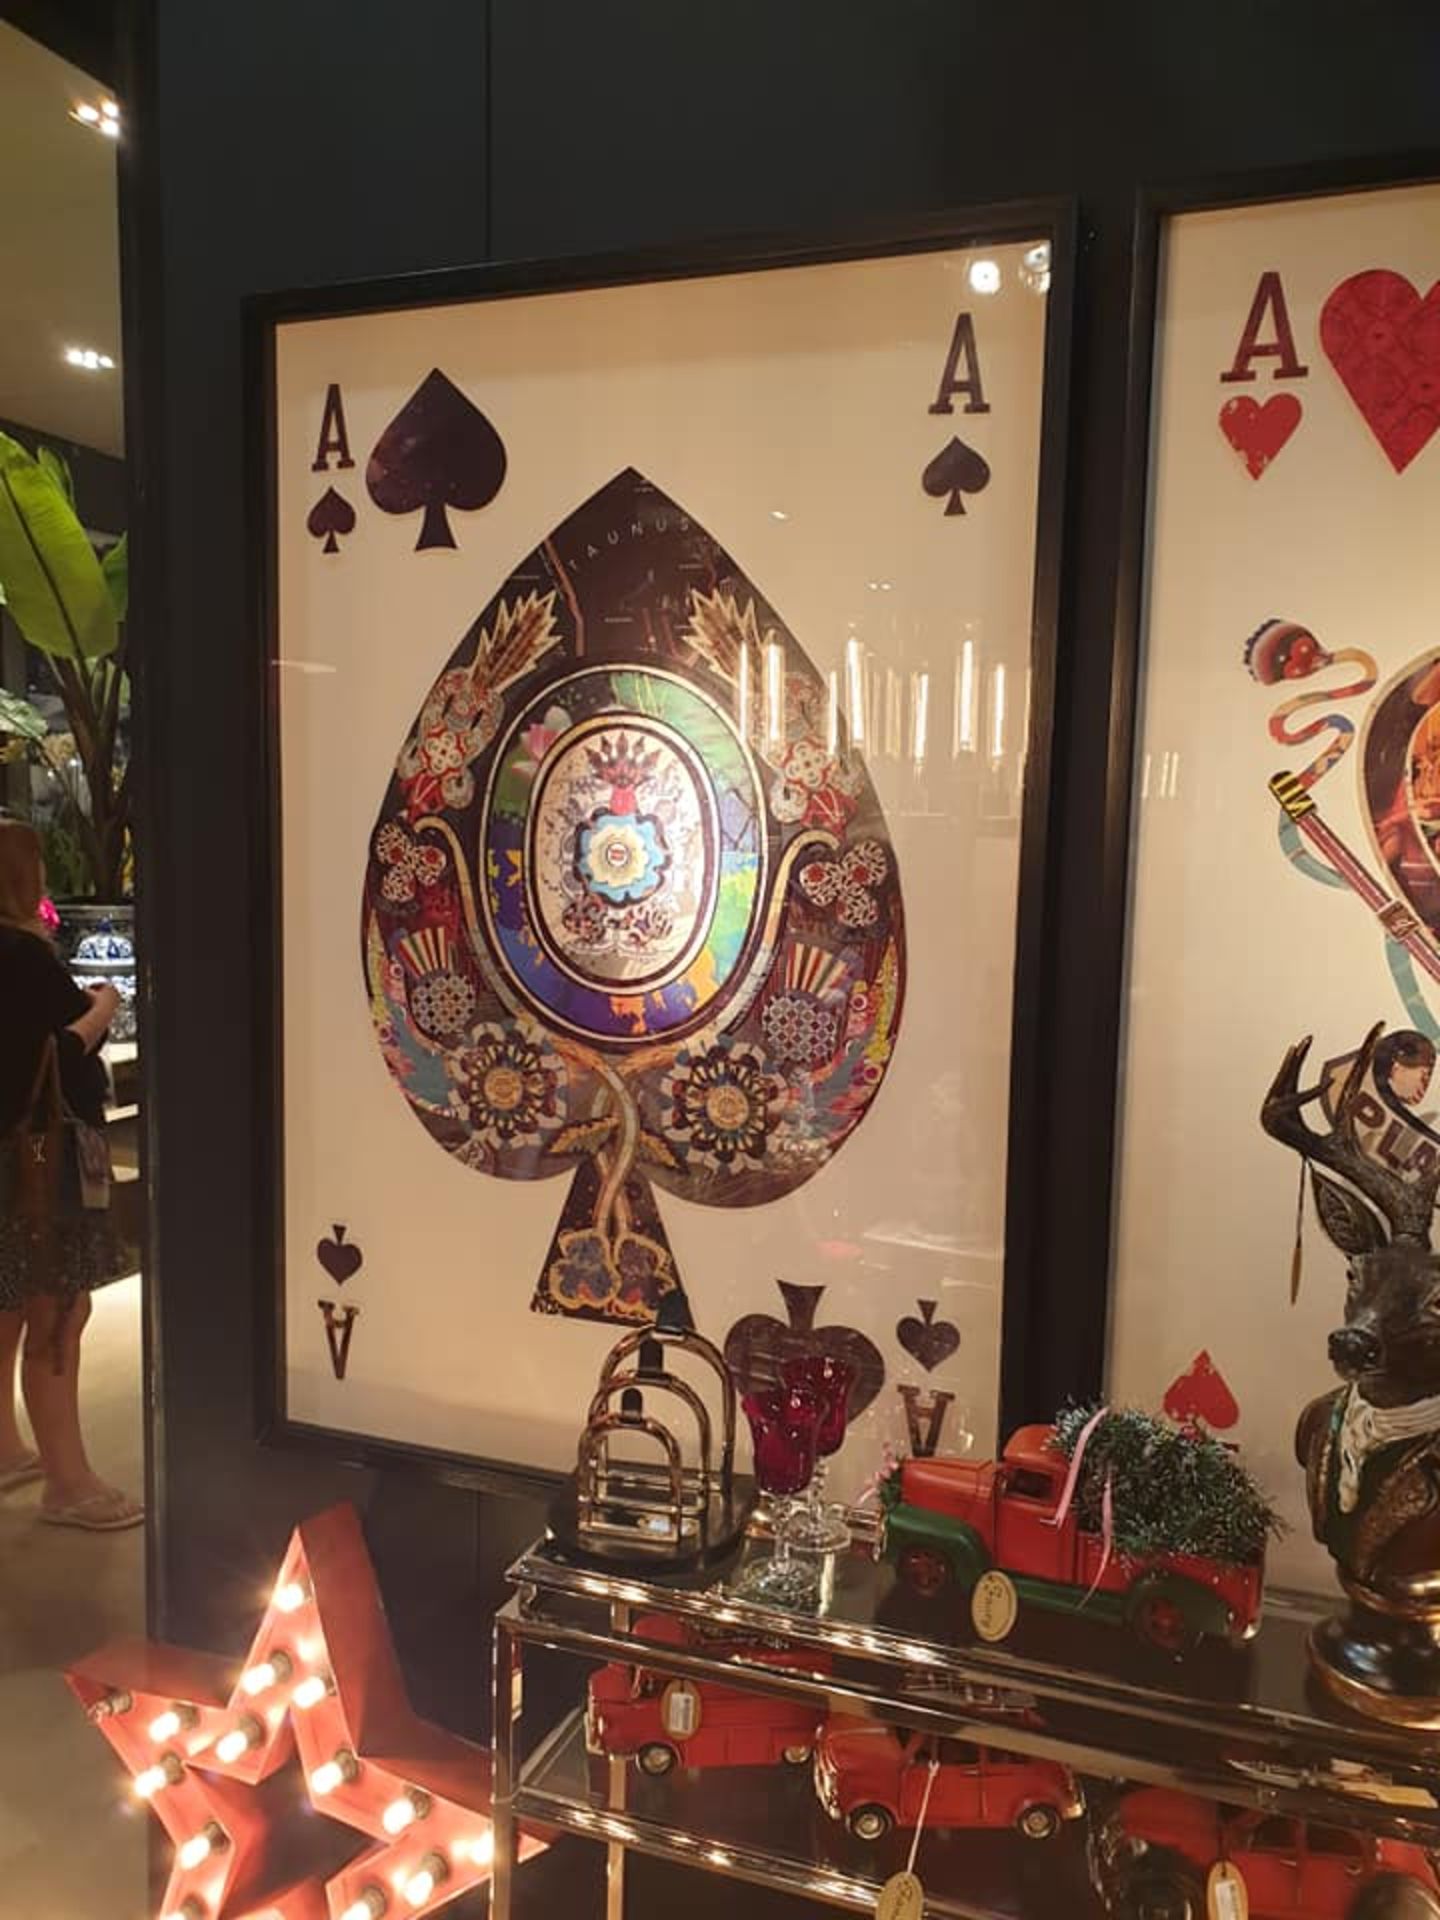 Framed Ace Of Spades Wall Art Playful And Quirky, This Cards Art Line Is An Enlarged Version Of